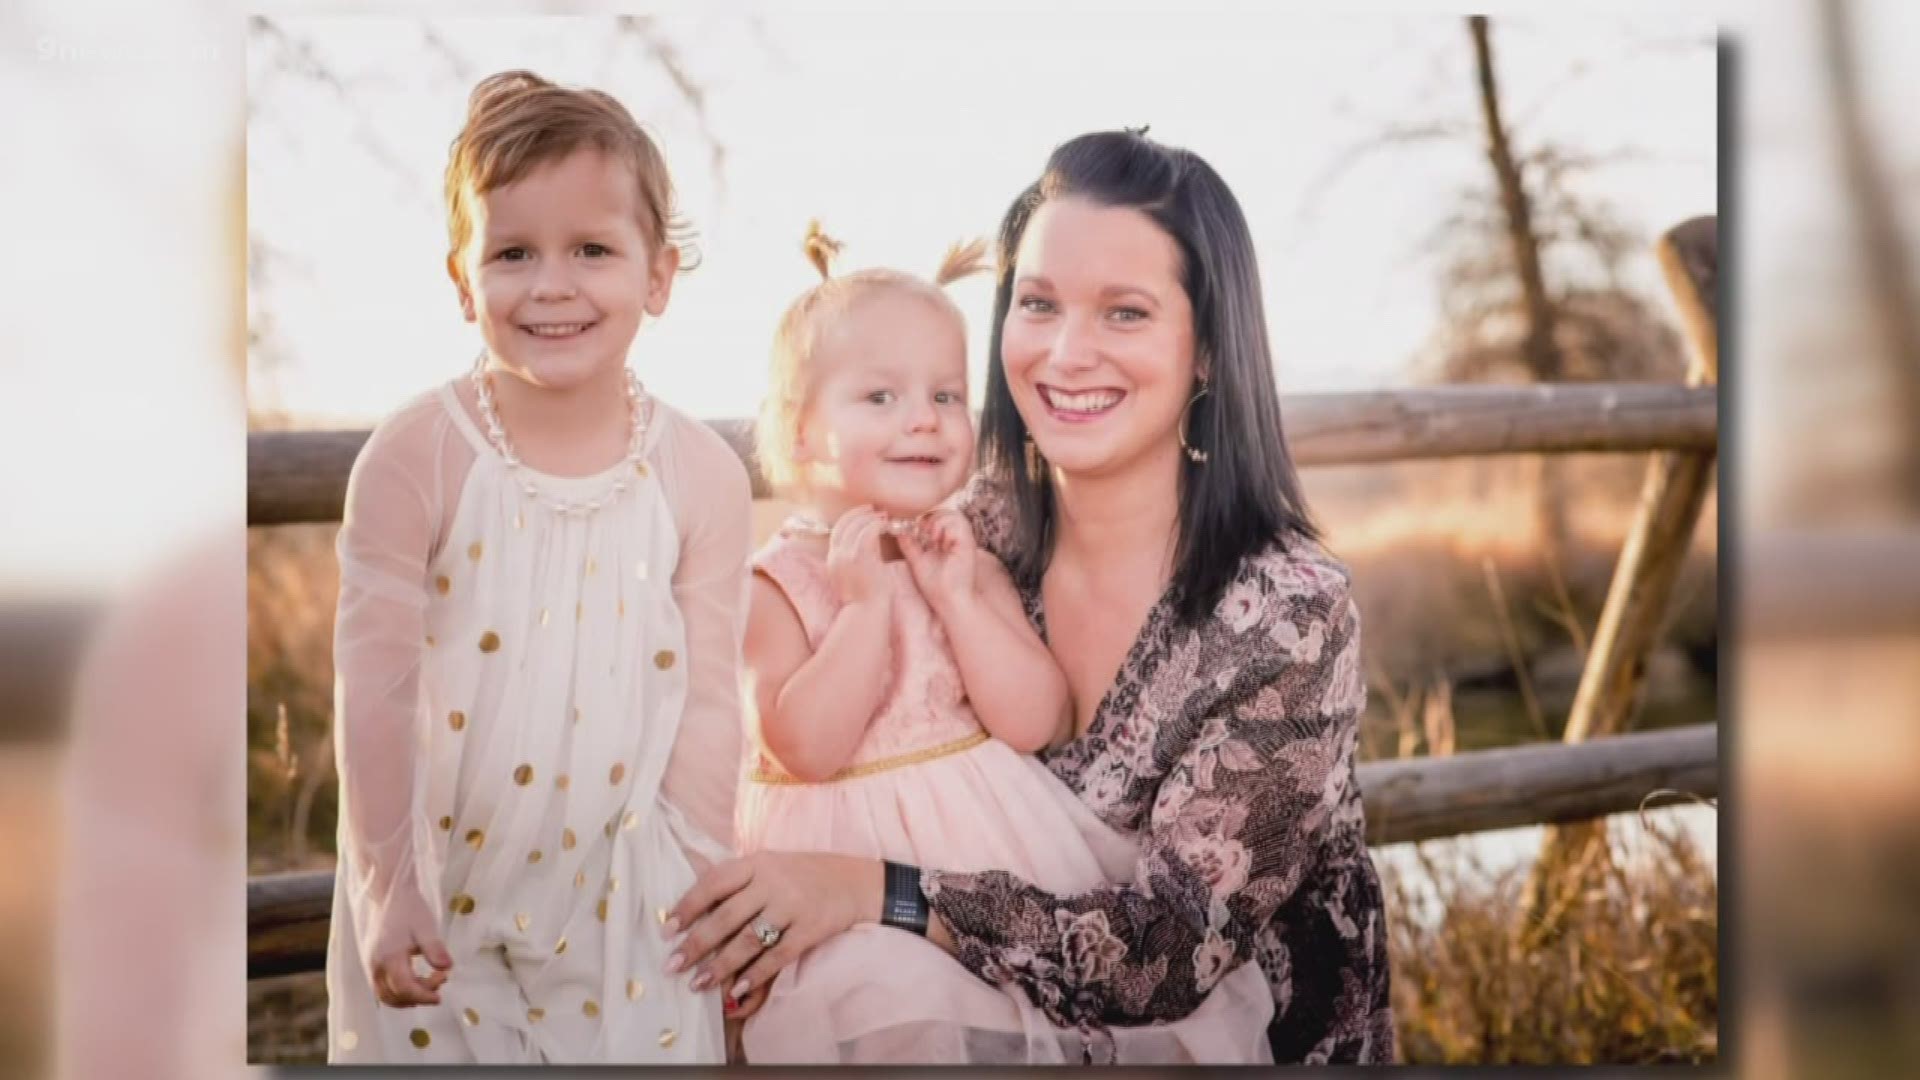 The Lifetime movie tells the story of how Chris Watts murdered his wife and two daughters.